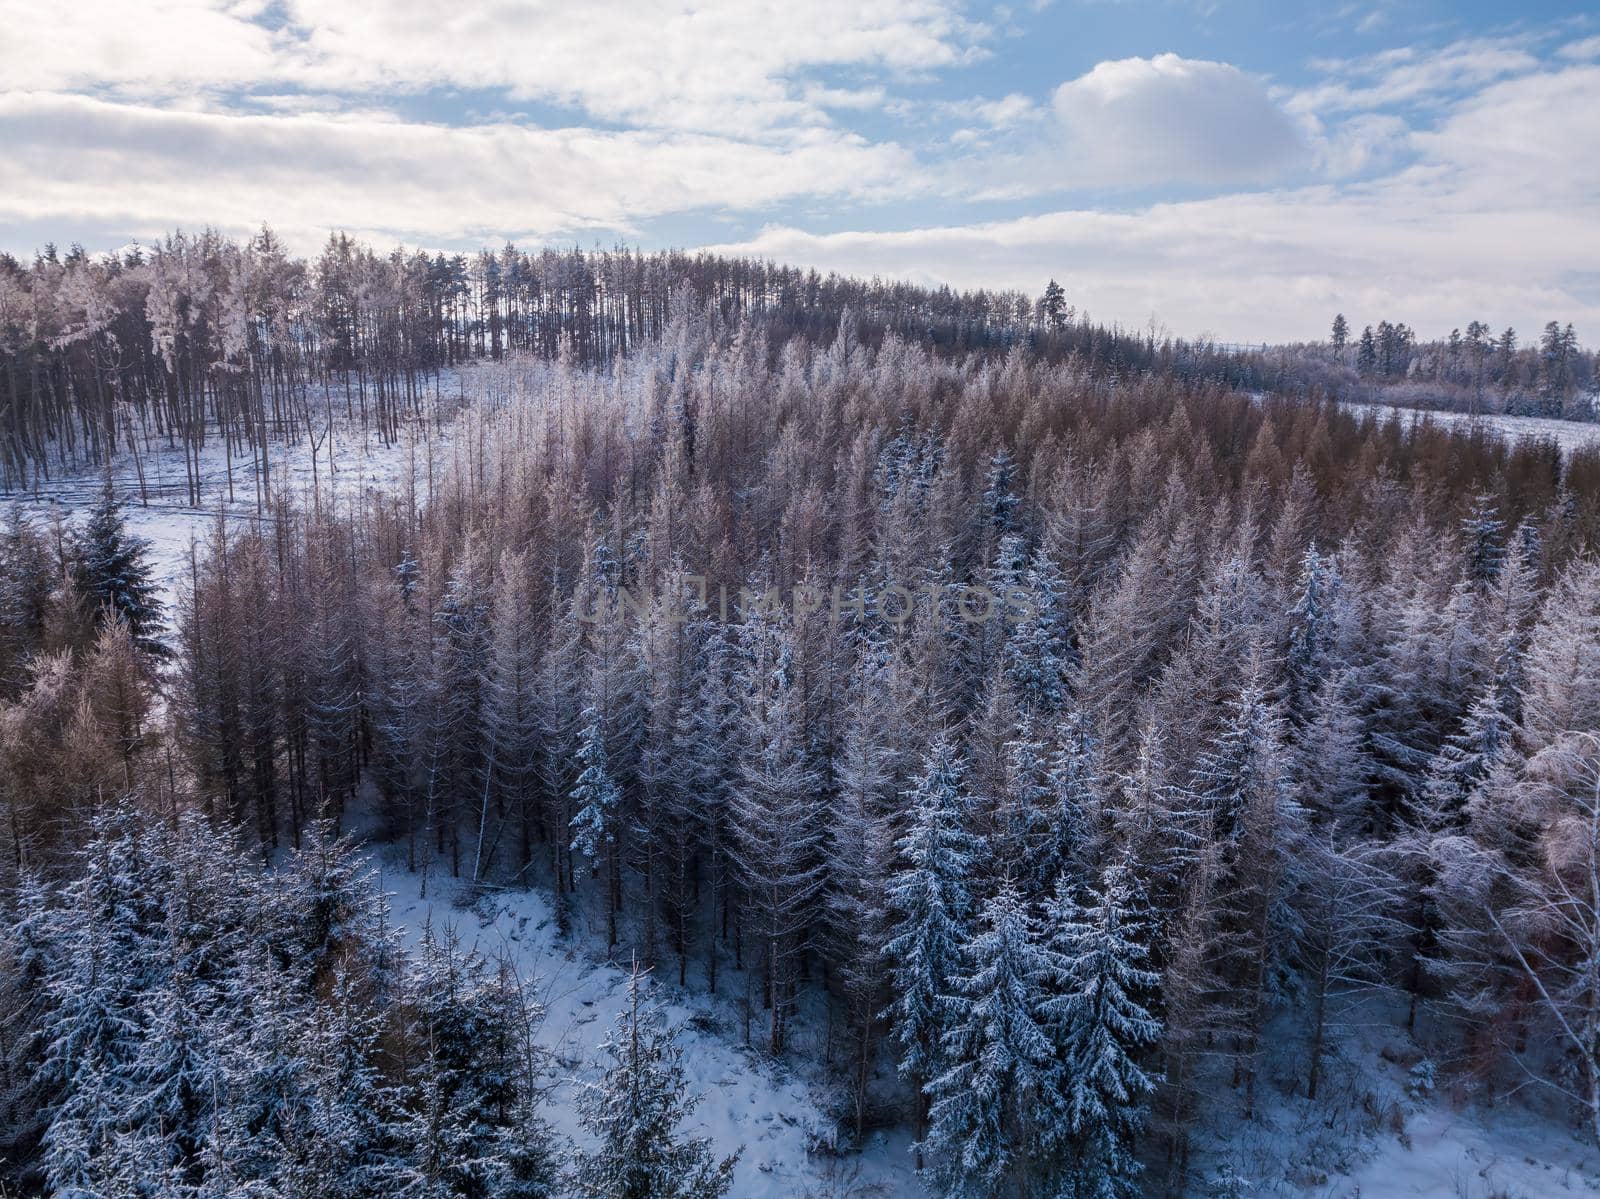 Aerial view of winter landscape covered by snow in sunny day. Czech Republic, Vysocina region highland